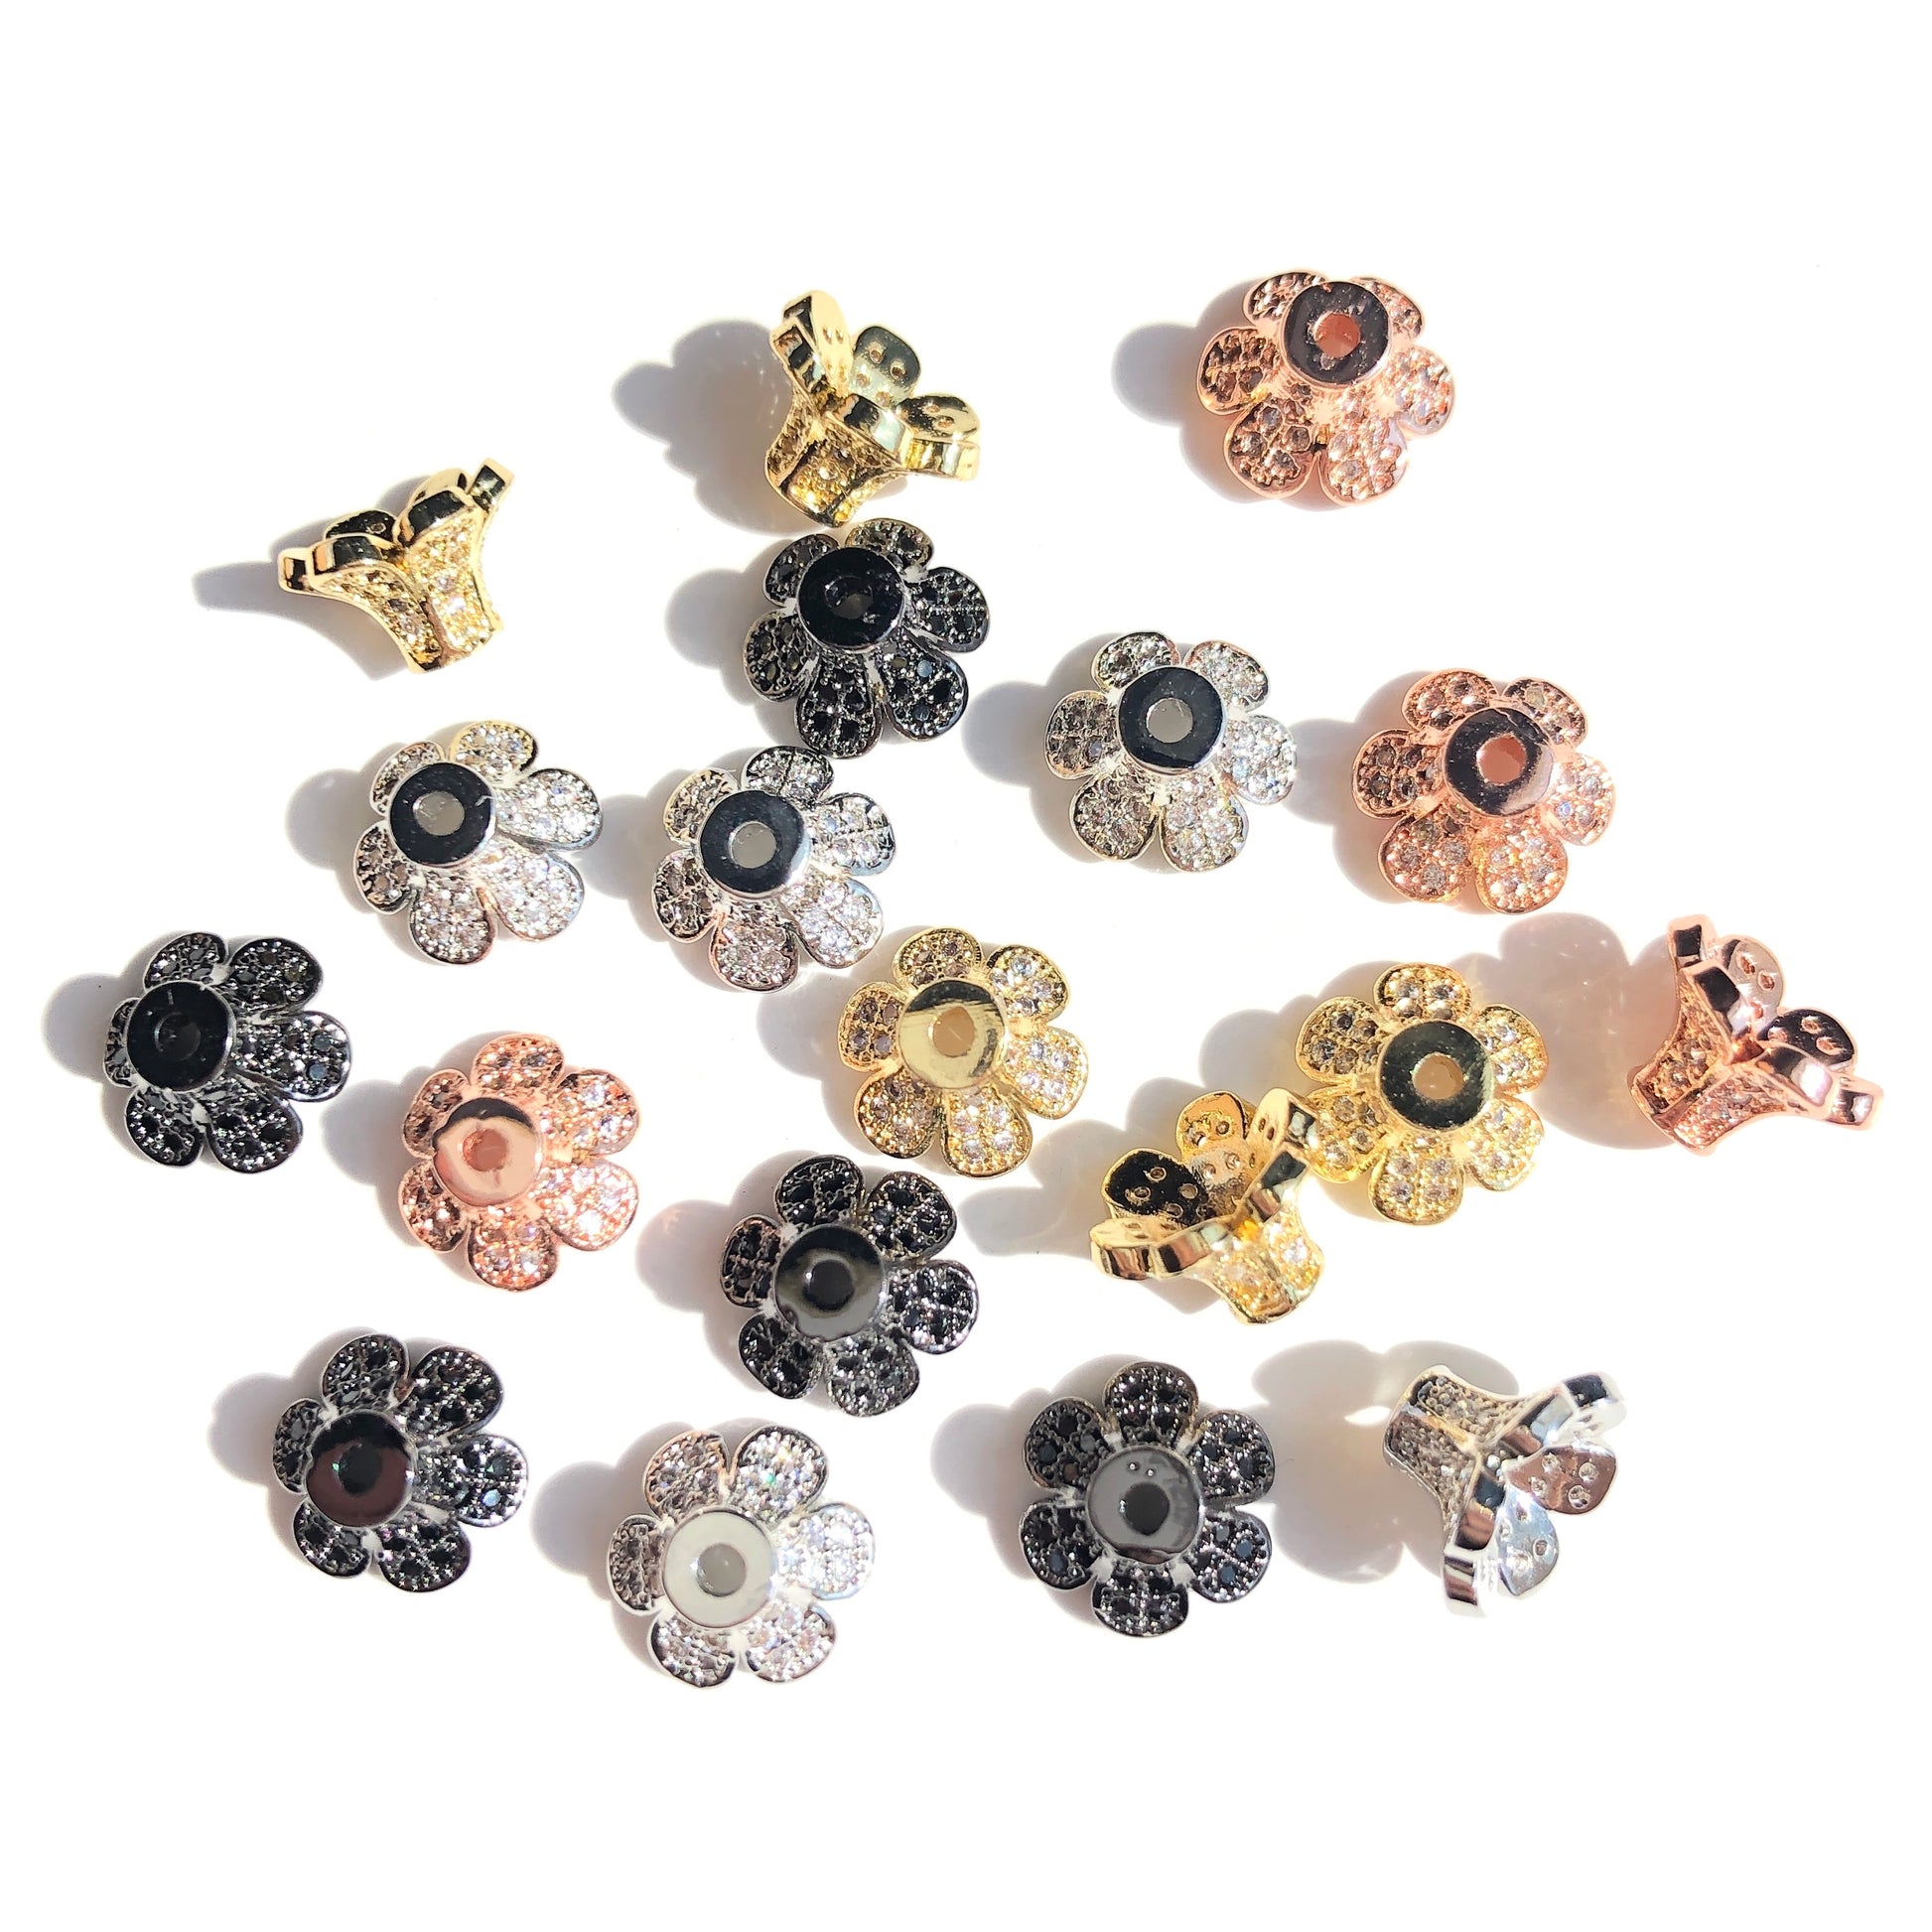 20pcs/lot 10*6mm CZ Paved Beads Caps Flower Spacers Mix Colors CZ Paved Spacers Beads Caps New Spacers Arrivals Charms Beads Beyond